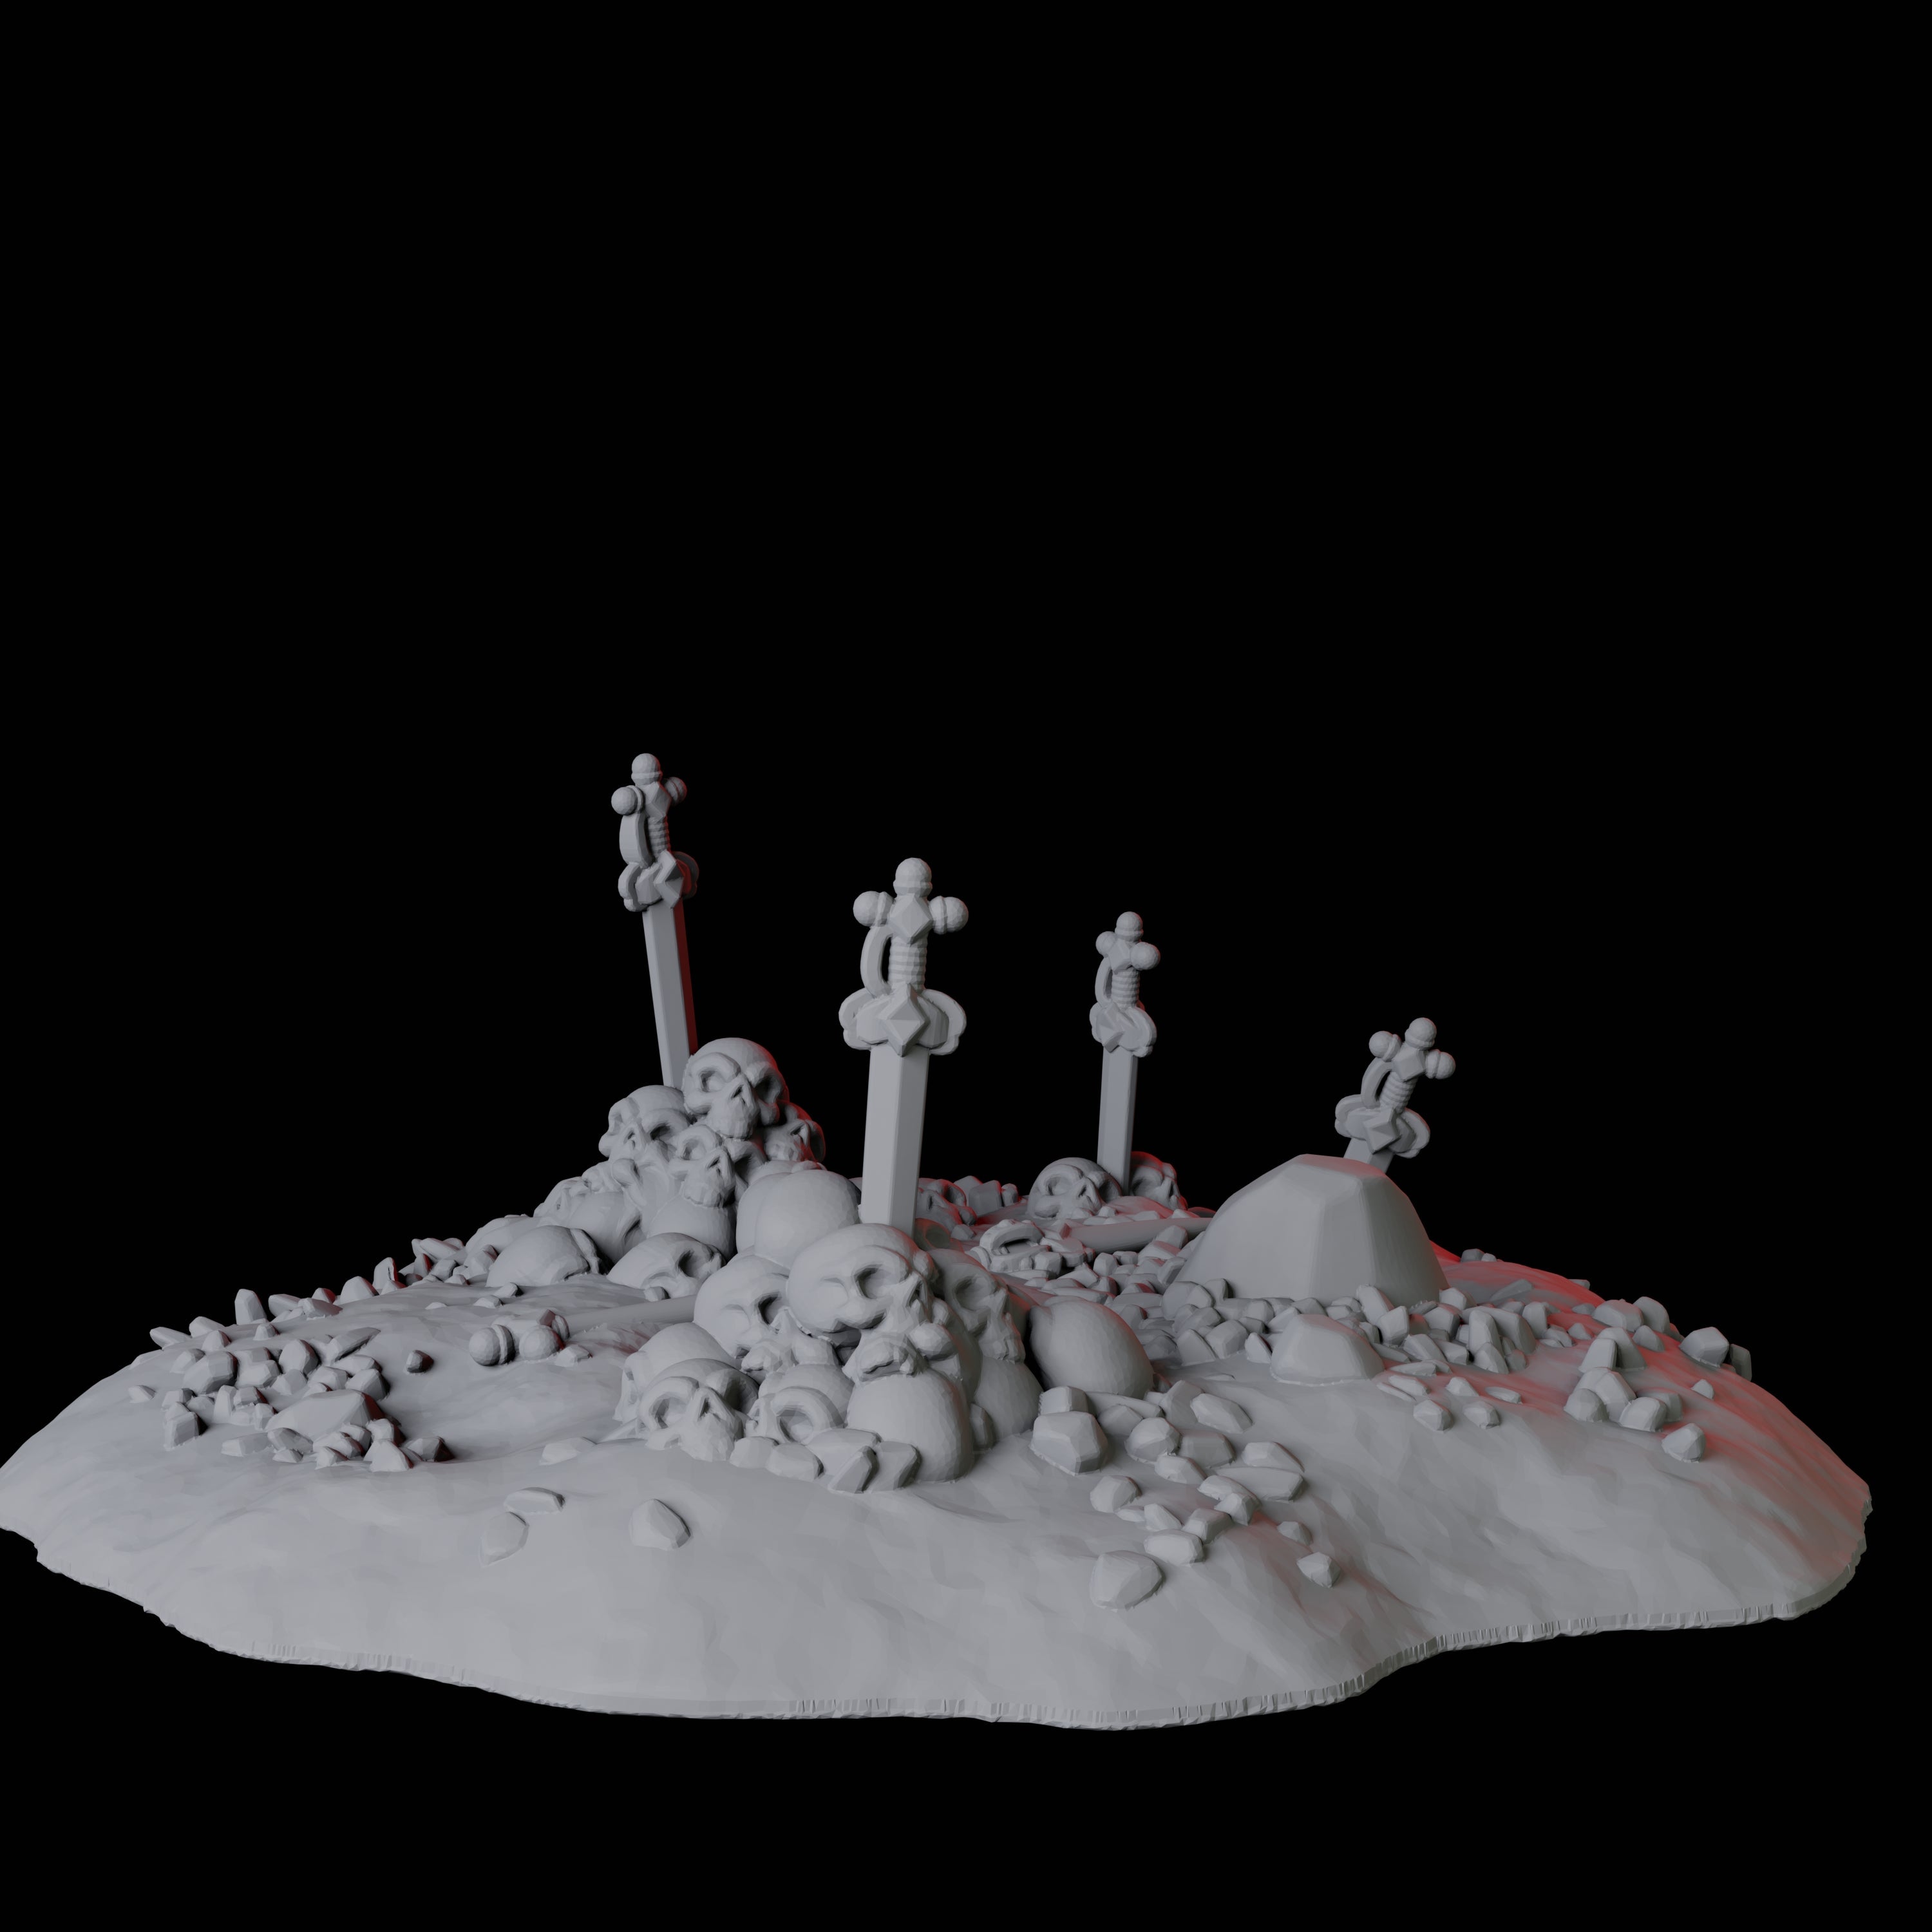 Hellscape Terrain Piece E Miniature for Dungeons and Dragons, Pathfinder or other TTRPGs